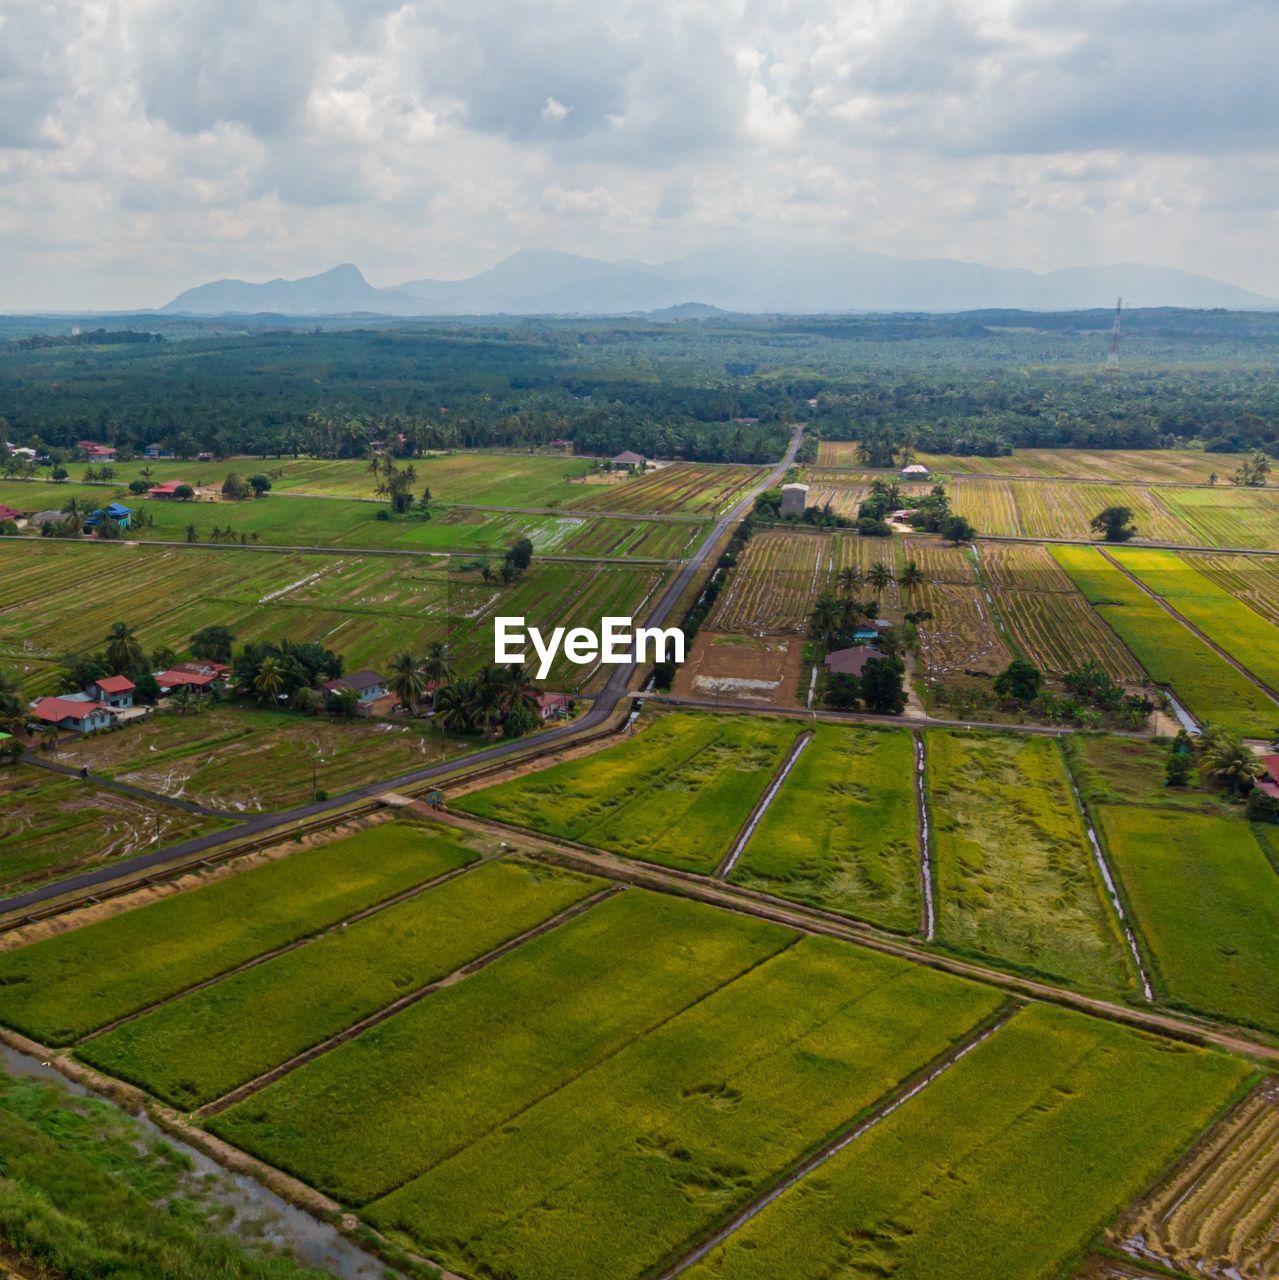 Aerial view of agriculture land, paddy fields in sungai rambai, melaka, malaysia